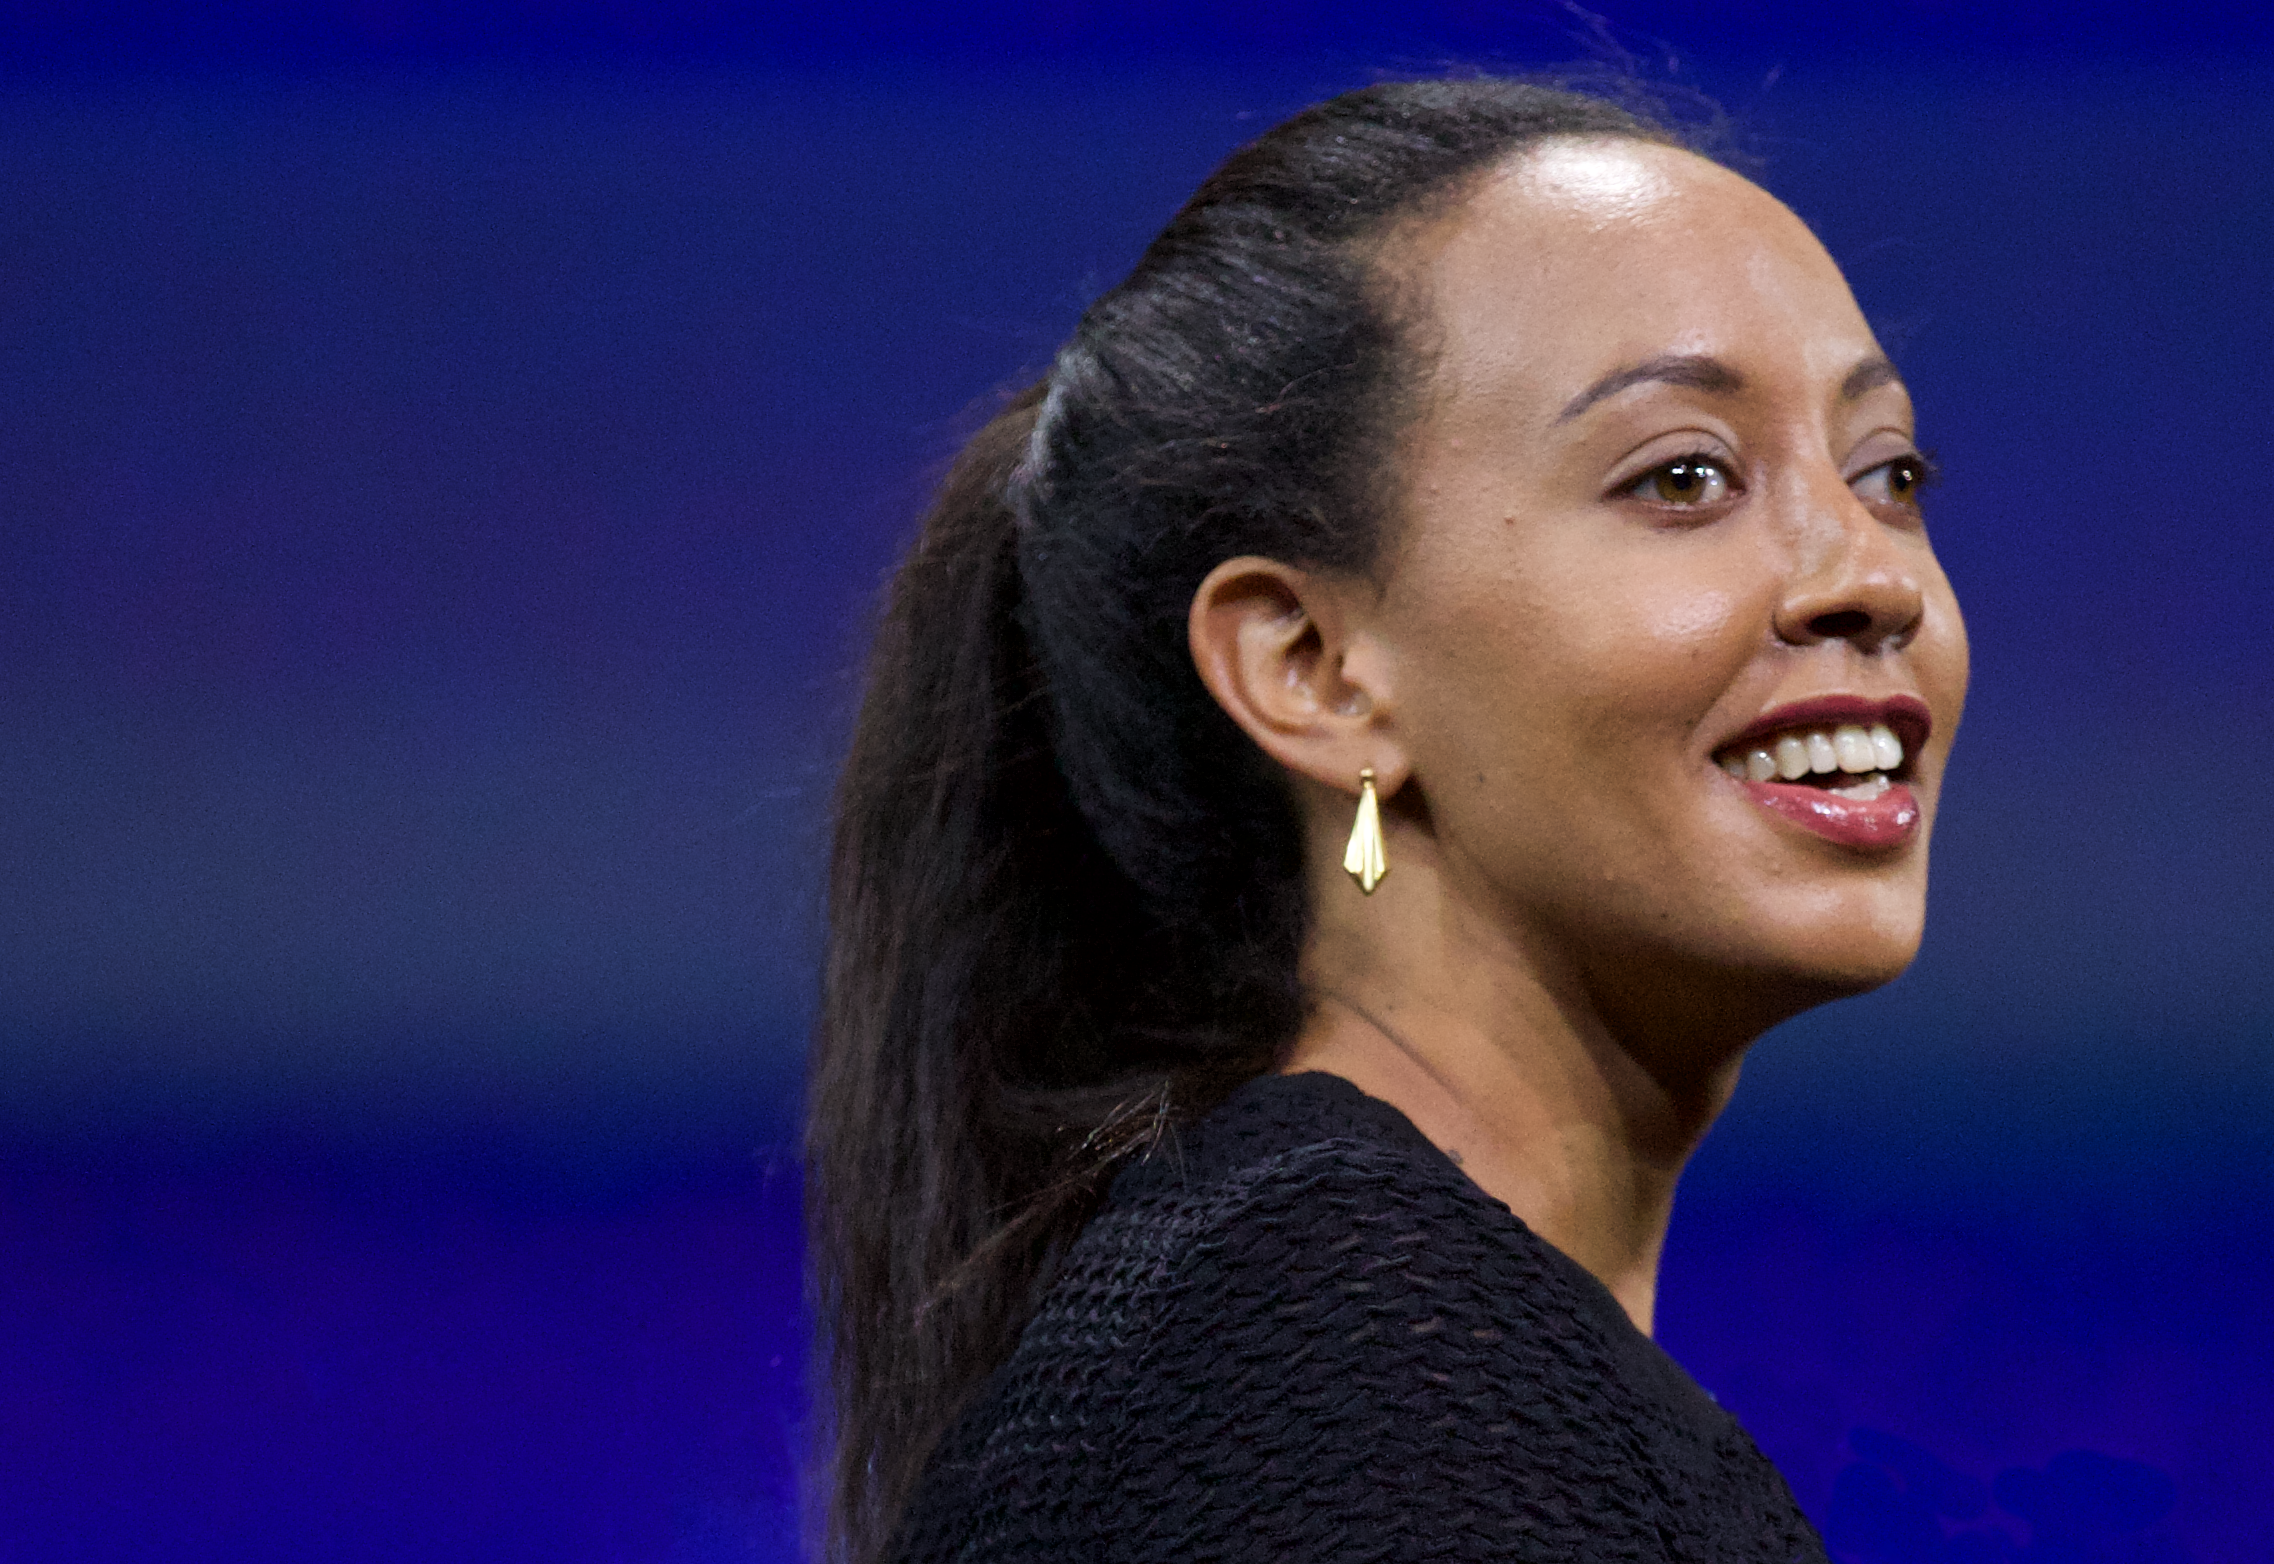 Profile picture of Haben Girma. Plain blue background headshot. Haben is smiling, wearing navy blue cardigan, gold earrings, hair tied back. Head turned to the right.